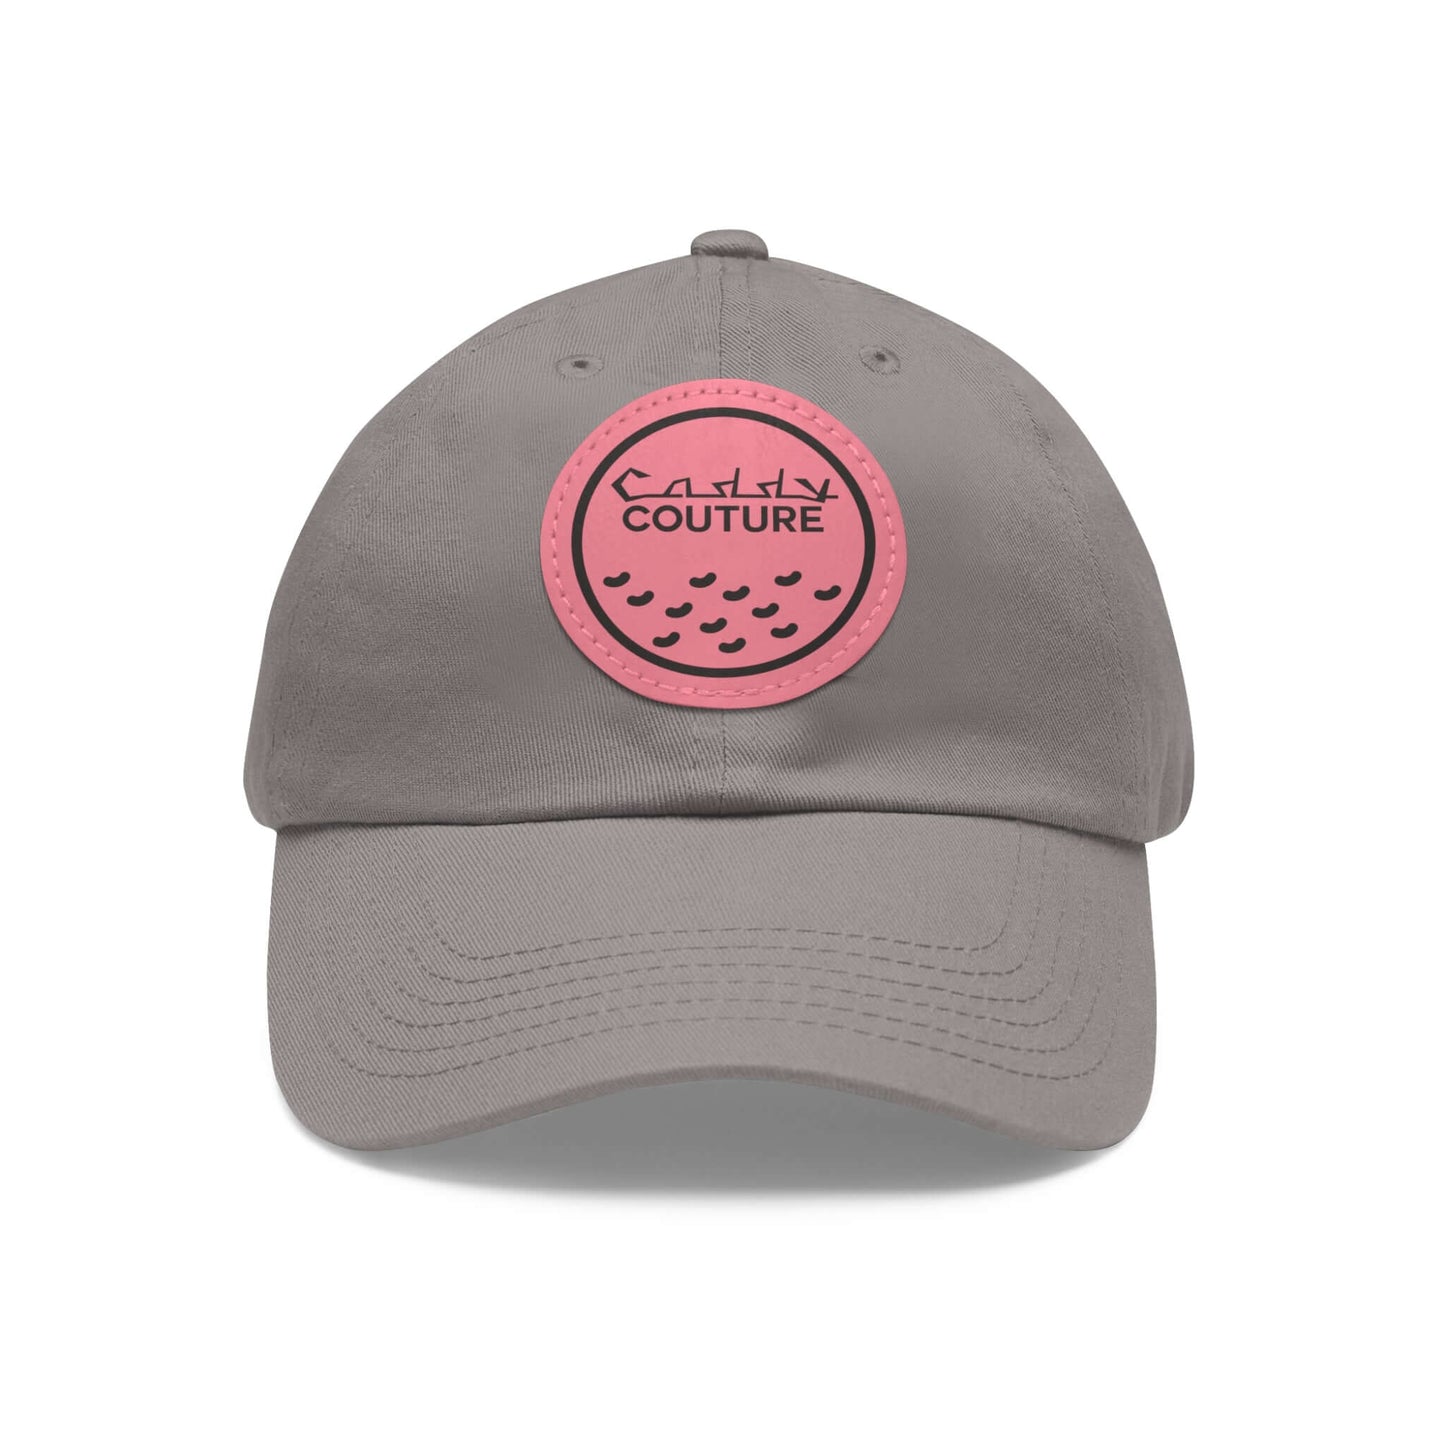 Caddy Couture Dad Hat with Leather Patch